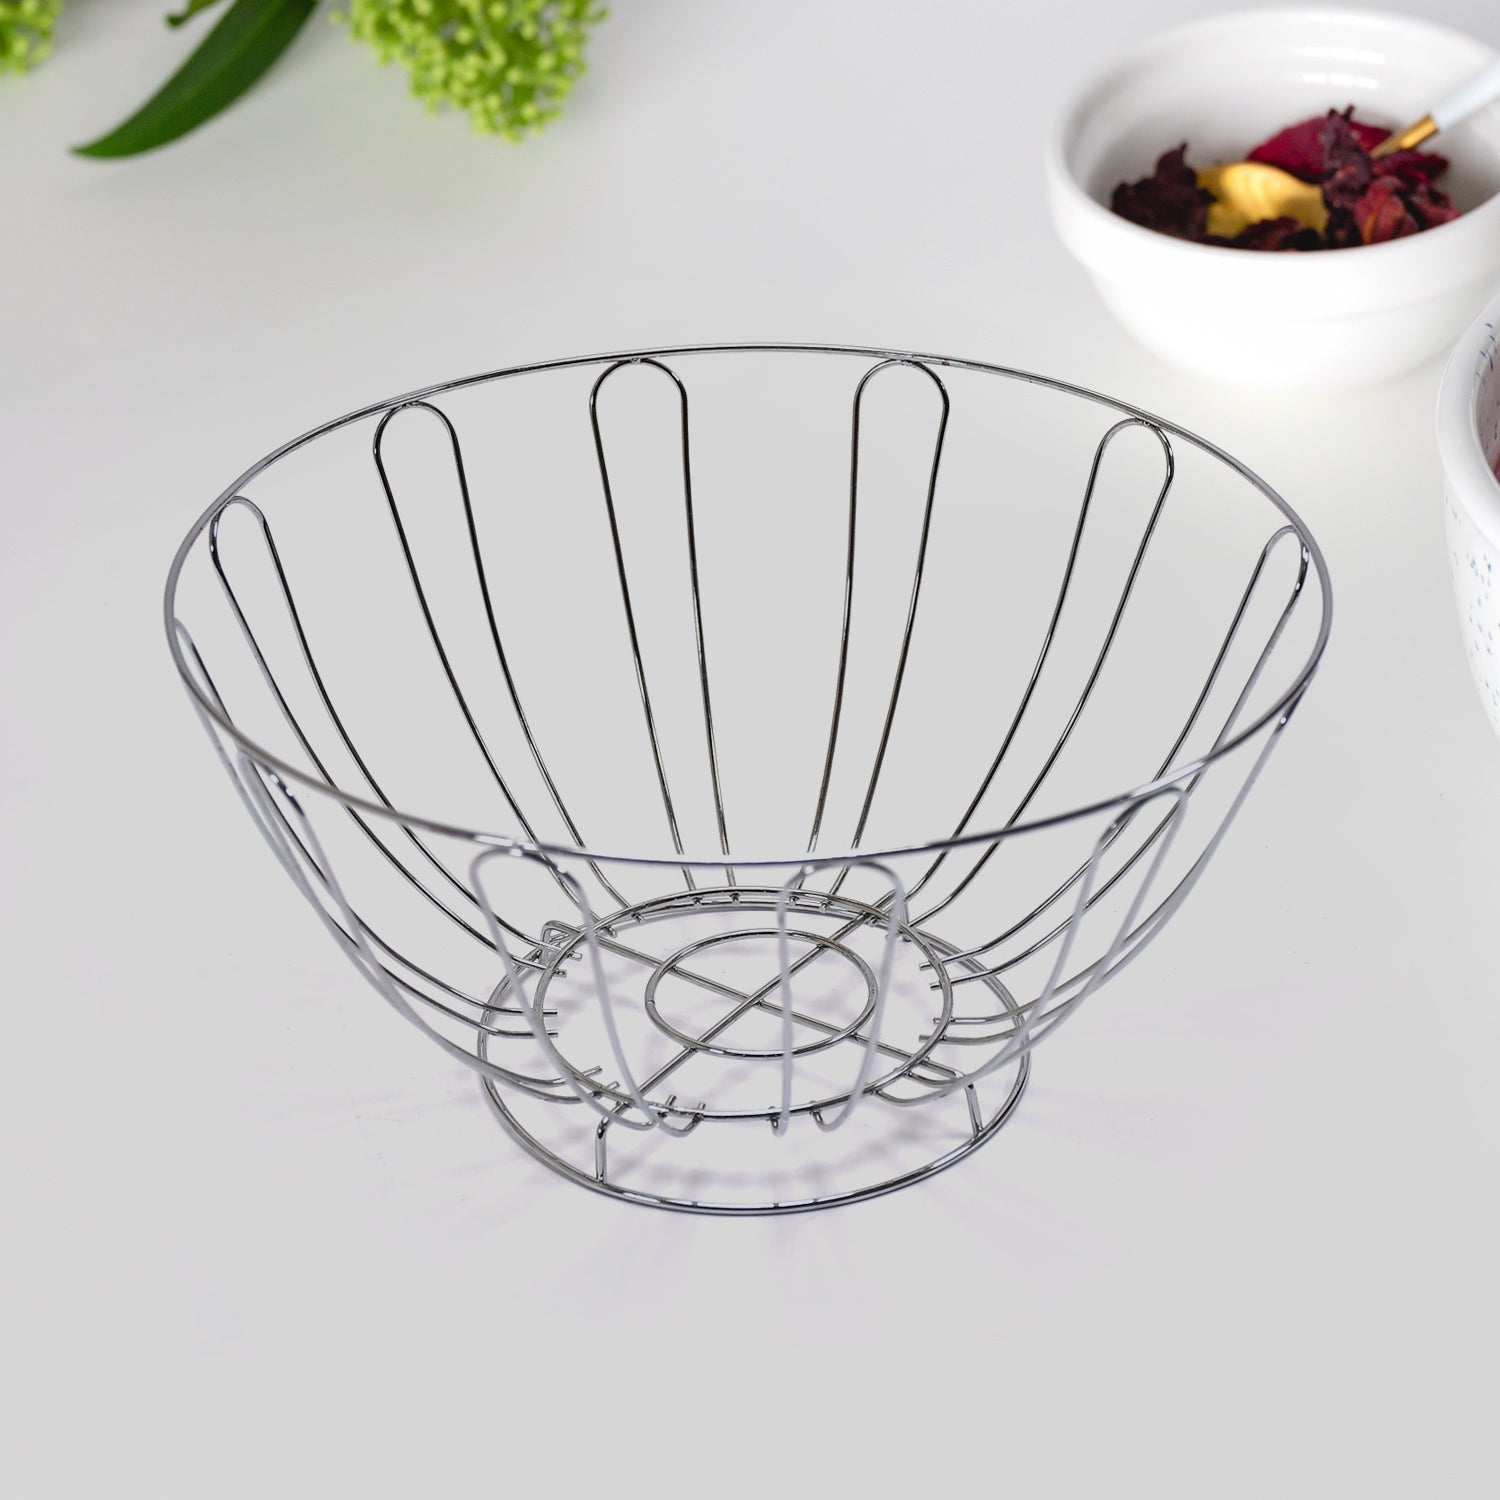 5152 Stainless Steel Folding Fruit and Vegetable Basket for Kitchen/Dining Table/Home DeoDap